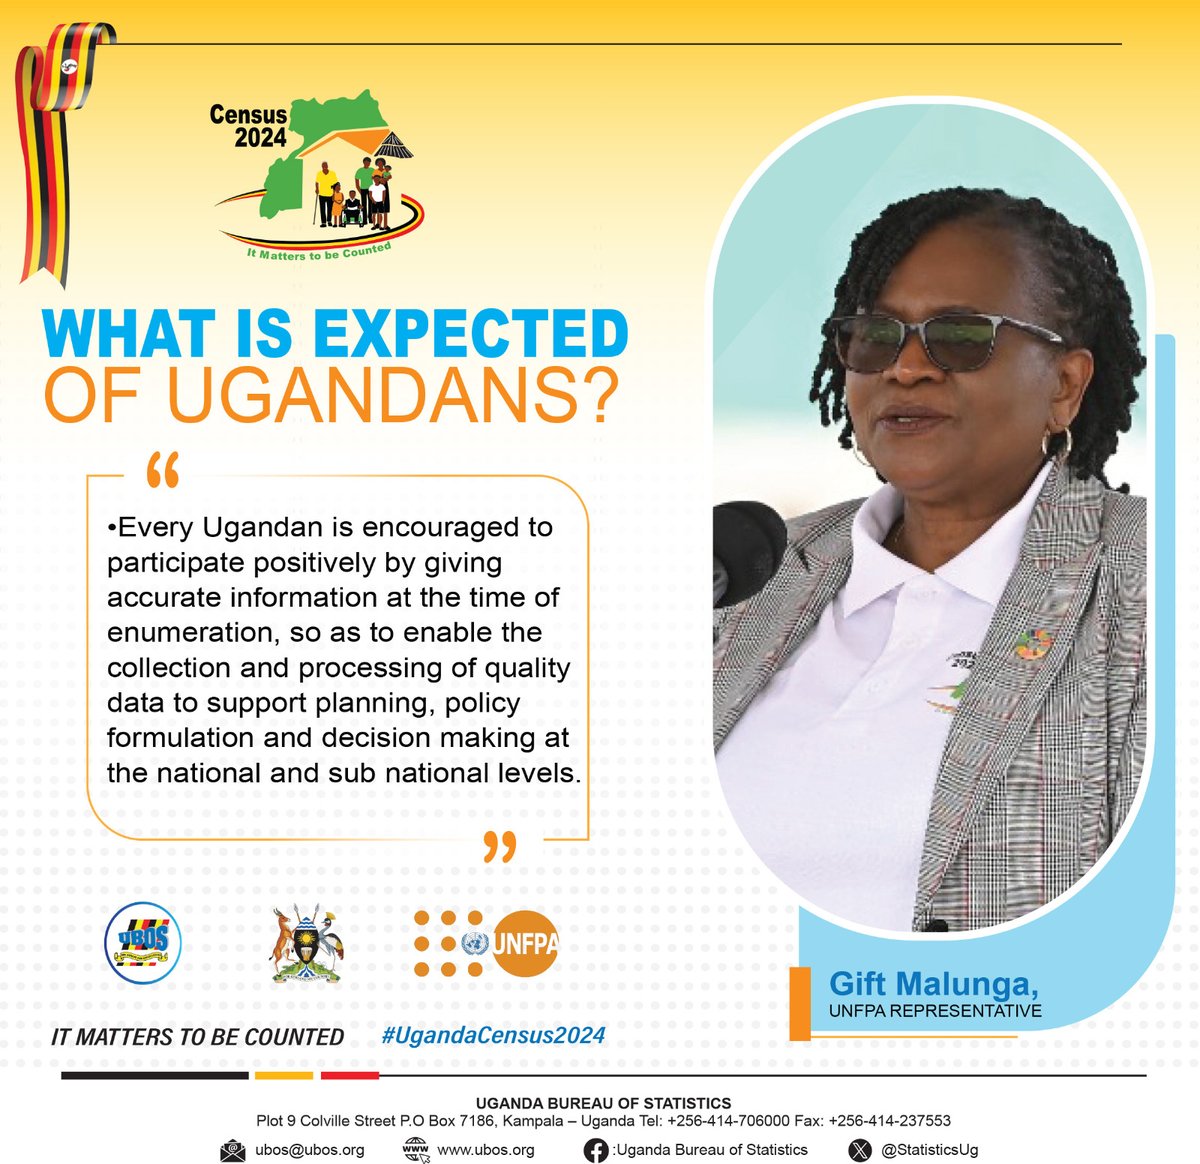 #UgandaCensus2024 Every Ugandan is encouraged to participate positively by giving accurate information at the time of enumeration so as to enable the collection and processing of quality data that will support policy formulation and decision-making at the national level.